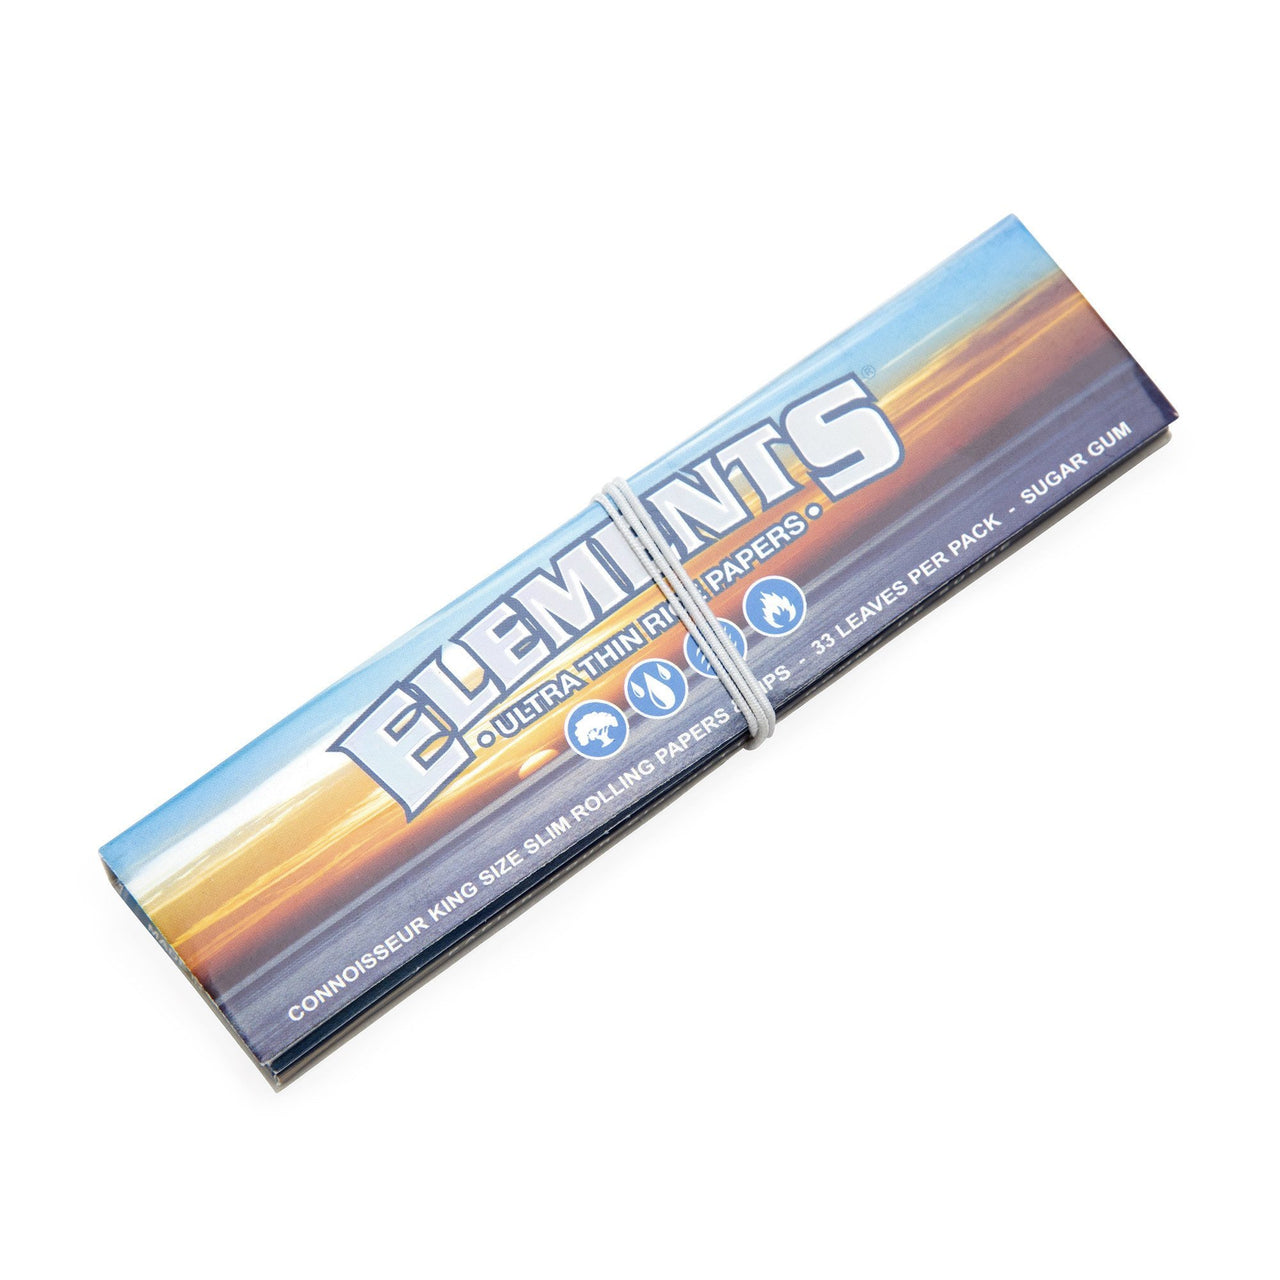 Elements Connoisseur King Size Rolling Papers w/ Tips - 420 Science - The most trusted online smoke shop.